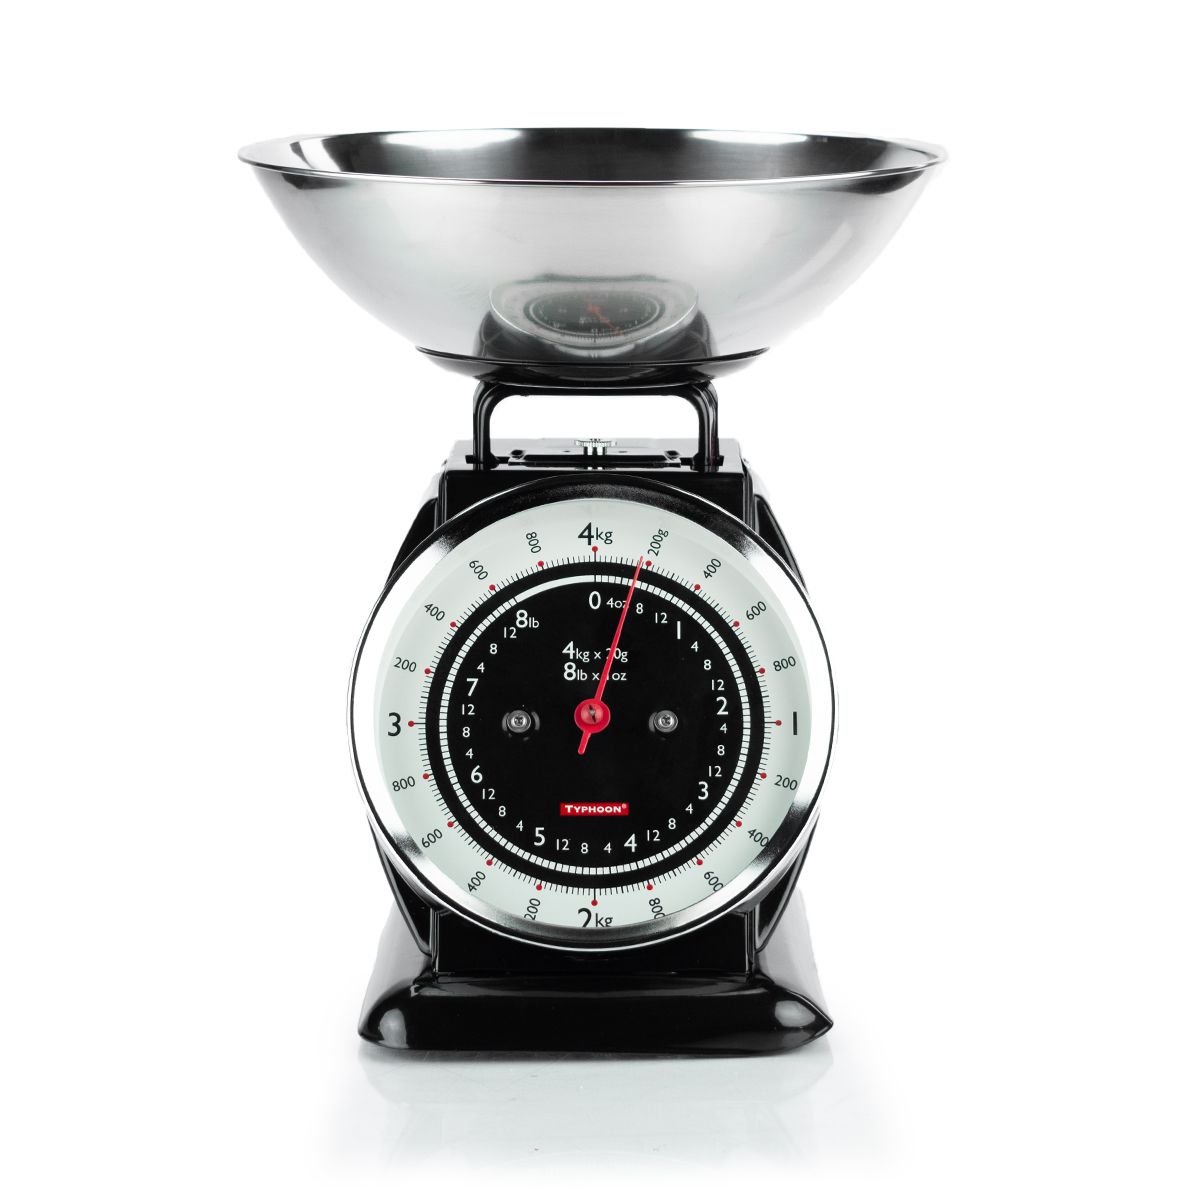 Rondo Bowl Scale (Model R115 in Stainless Steel) from Escali Scales